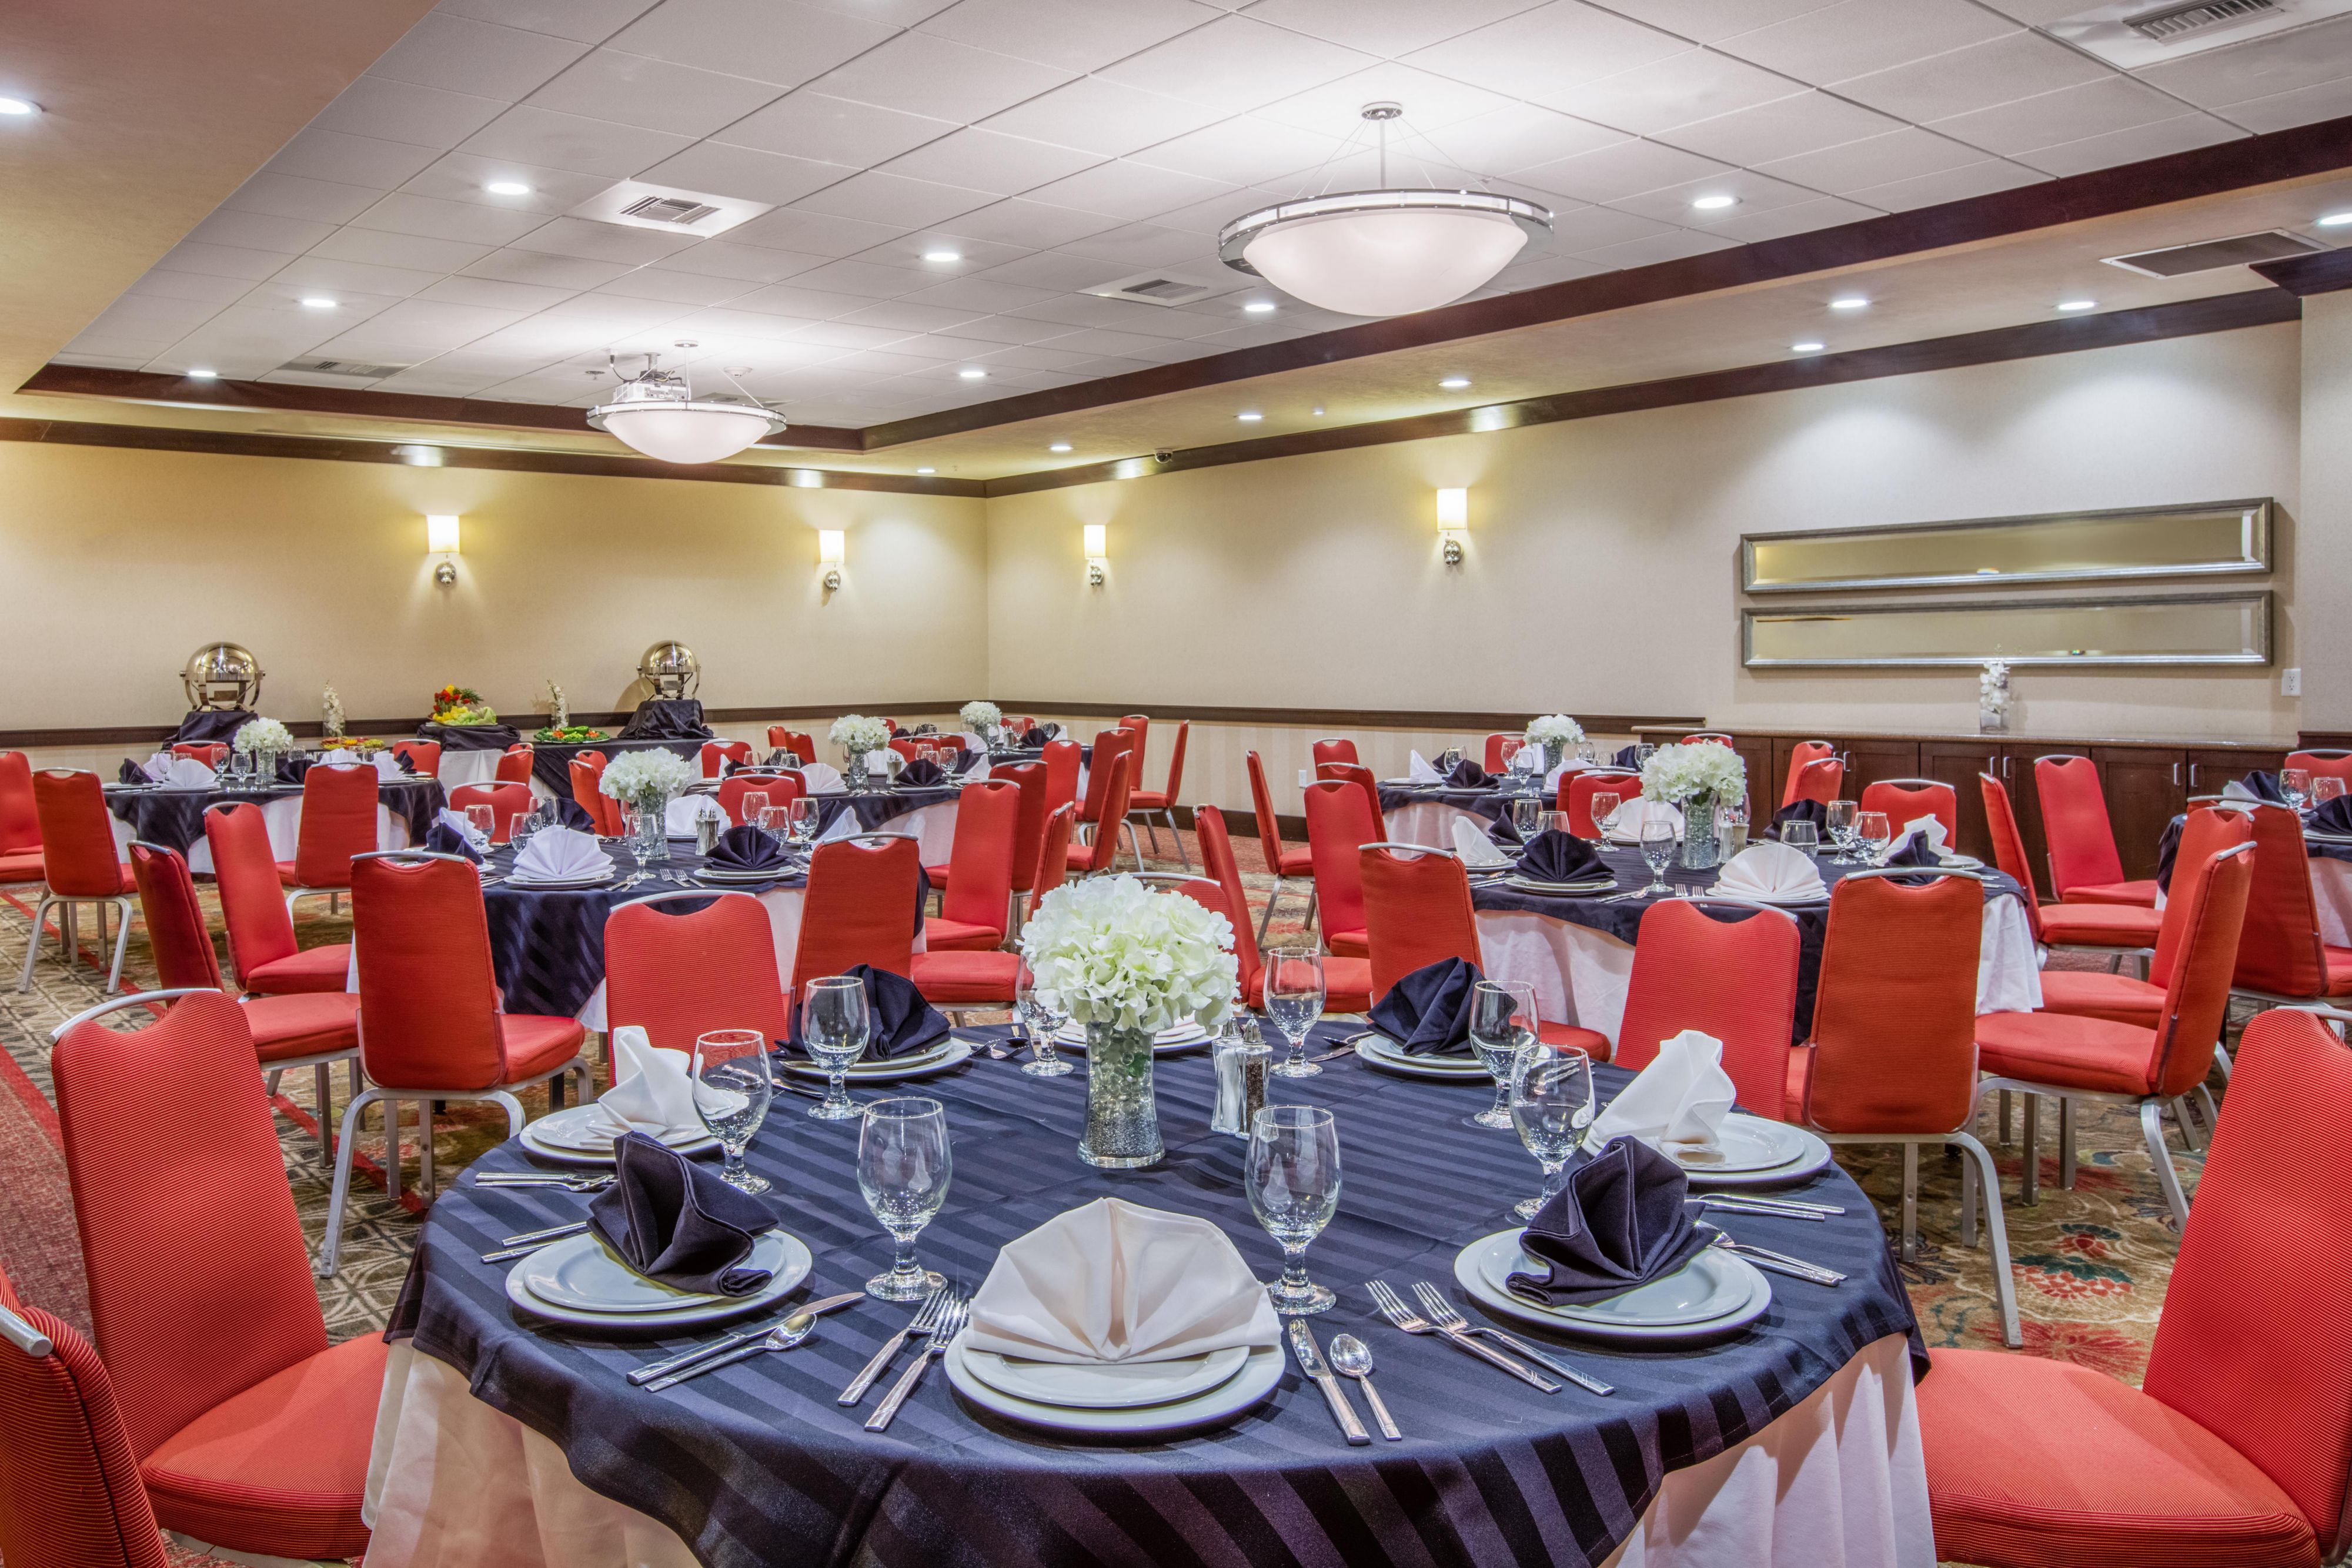 Enjoy incredible service and delicious food in our ballroom.